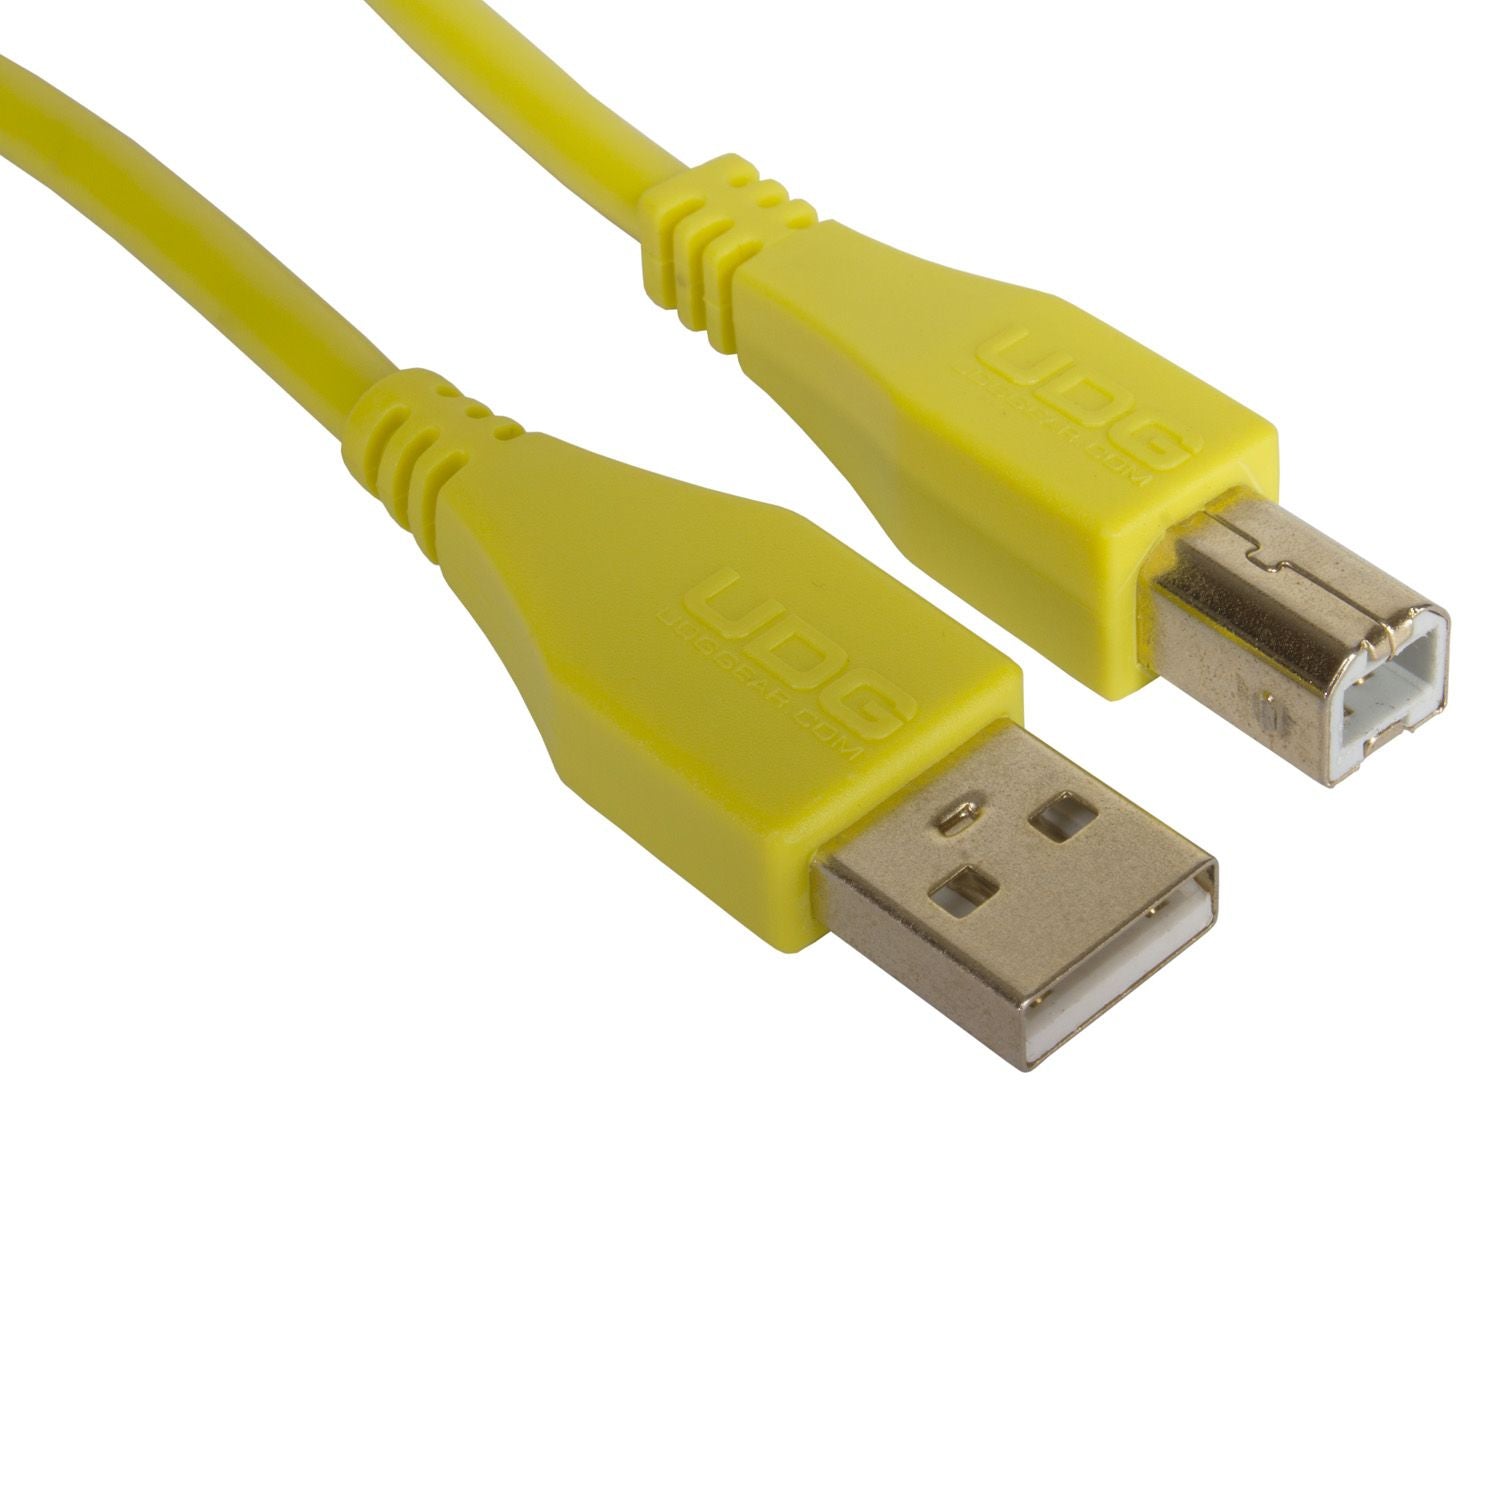 UDG USB Cable A-B 2m Yellow U95002YL